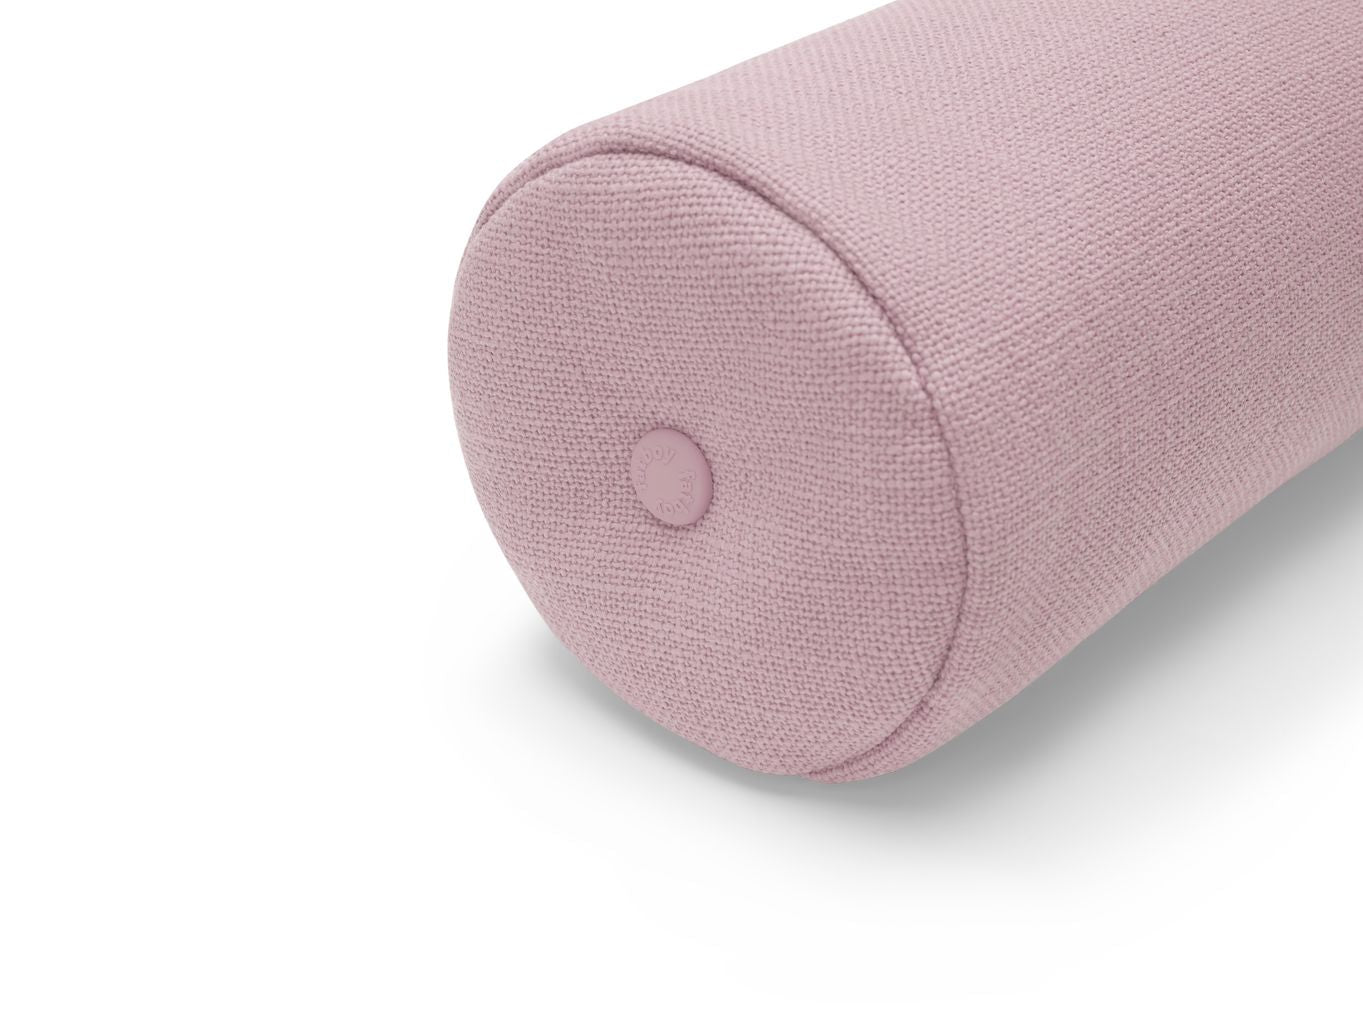 Fatboy Puff Weave Rolster Pillow, Bubble Pink